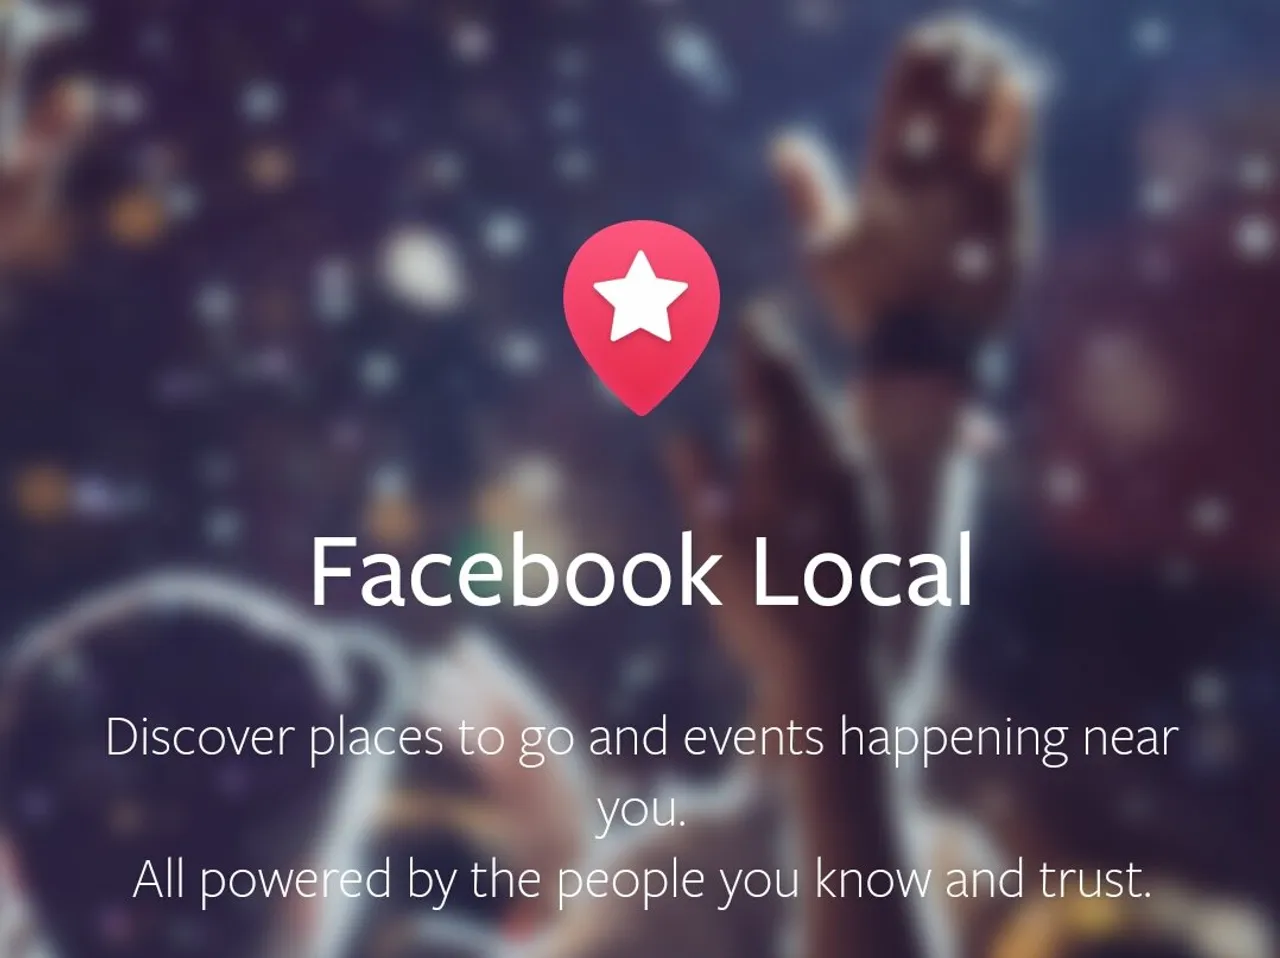 Facebook relaunches its standalone Events app as Facebook Local